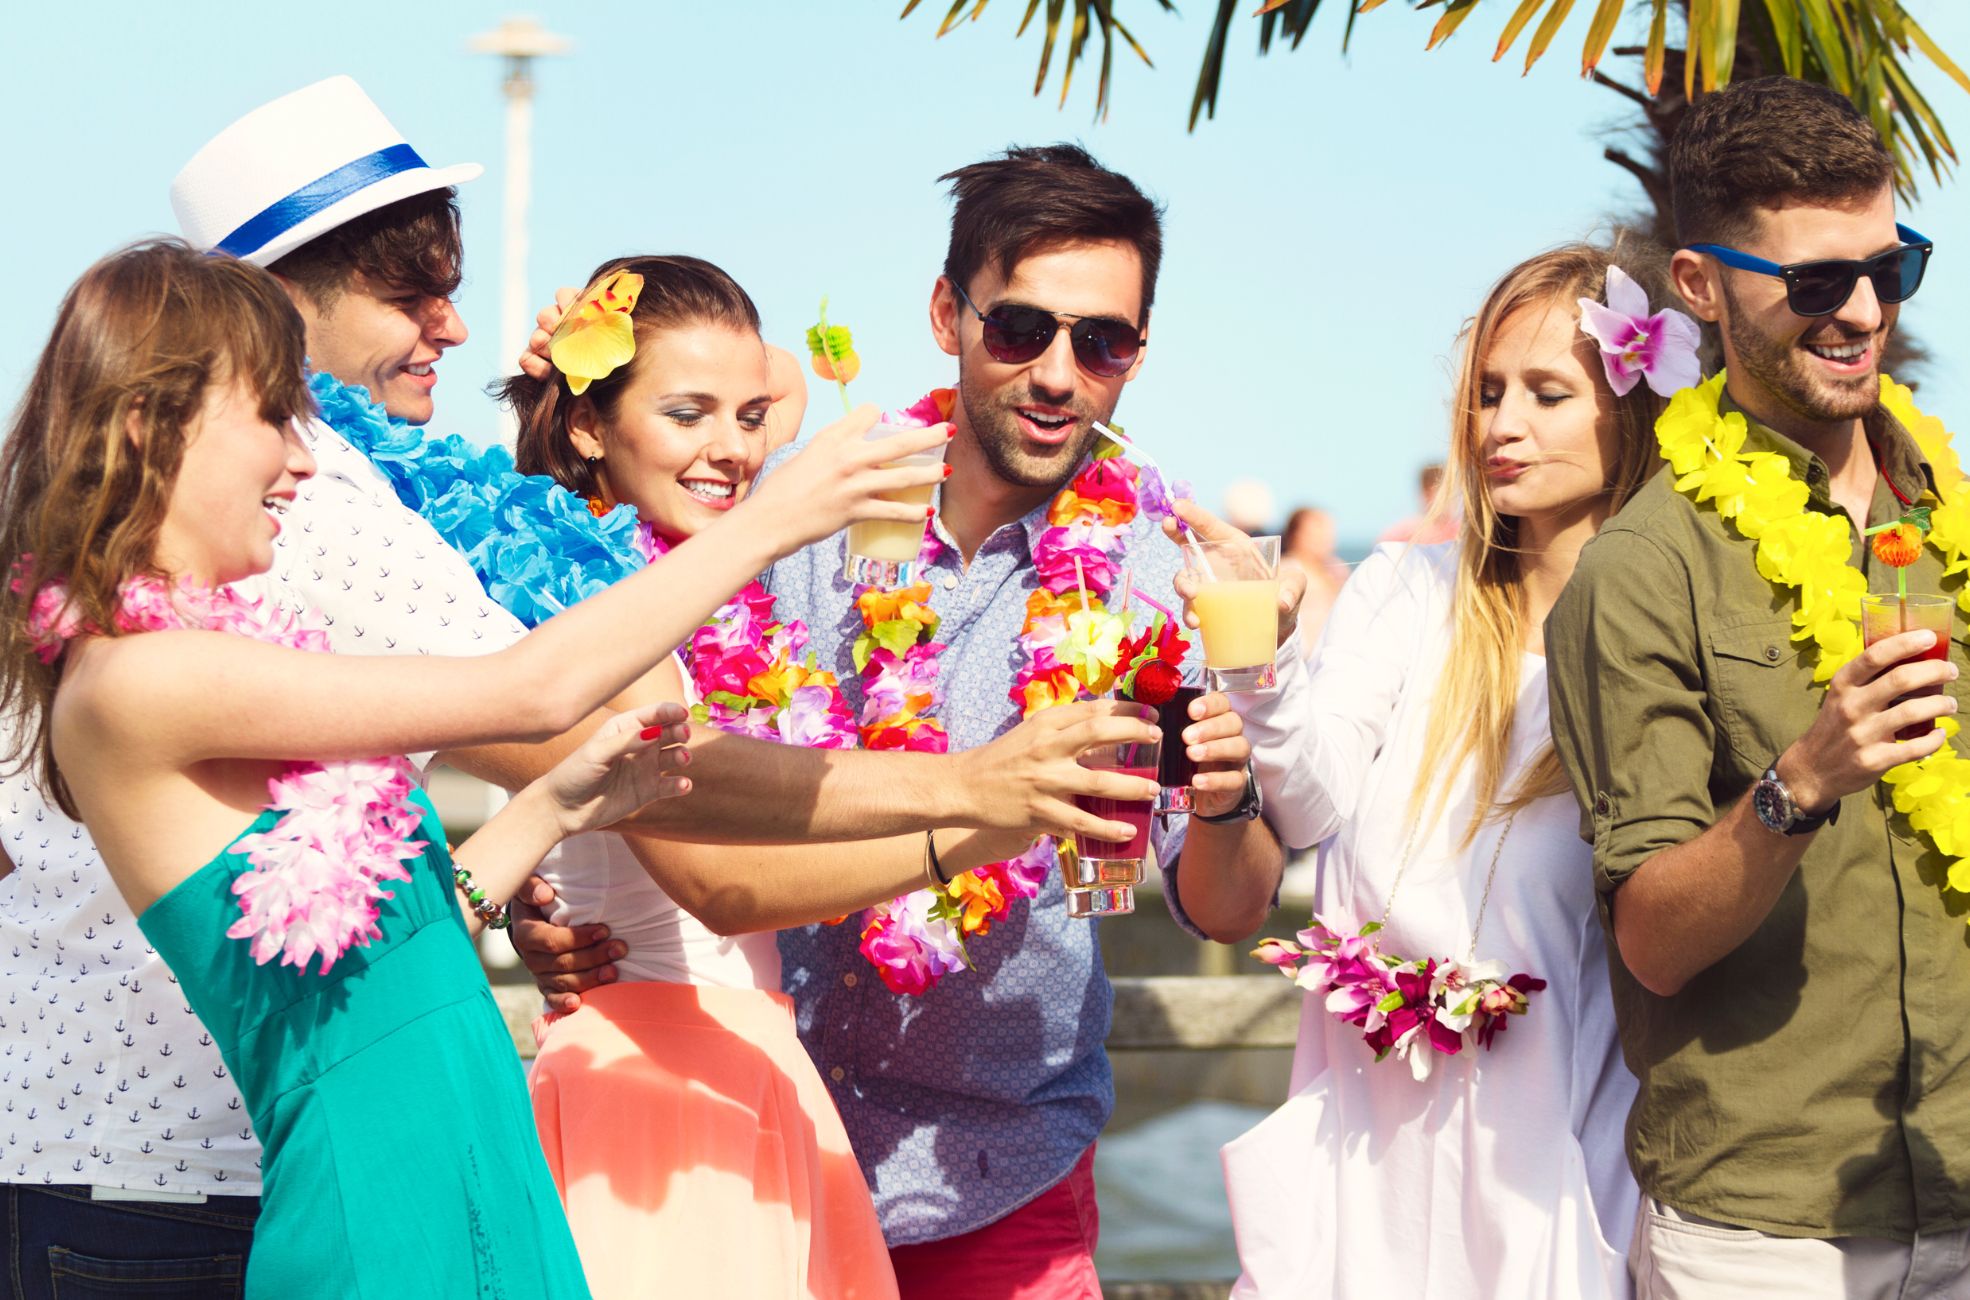 Stock Photo Of A Celebration With A Beach Party Theme